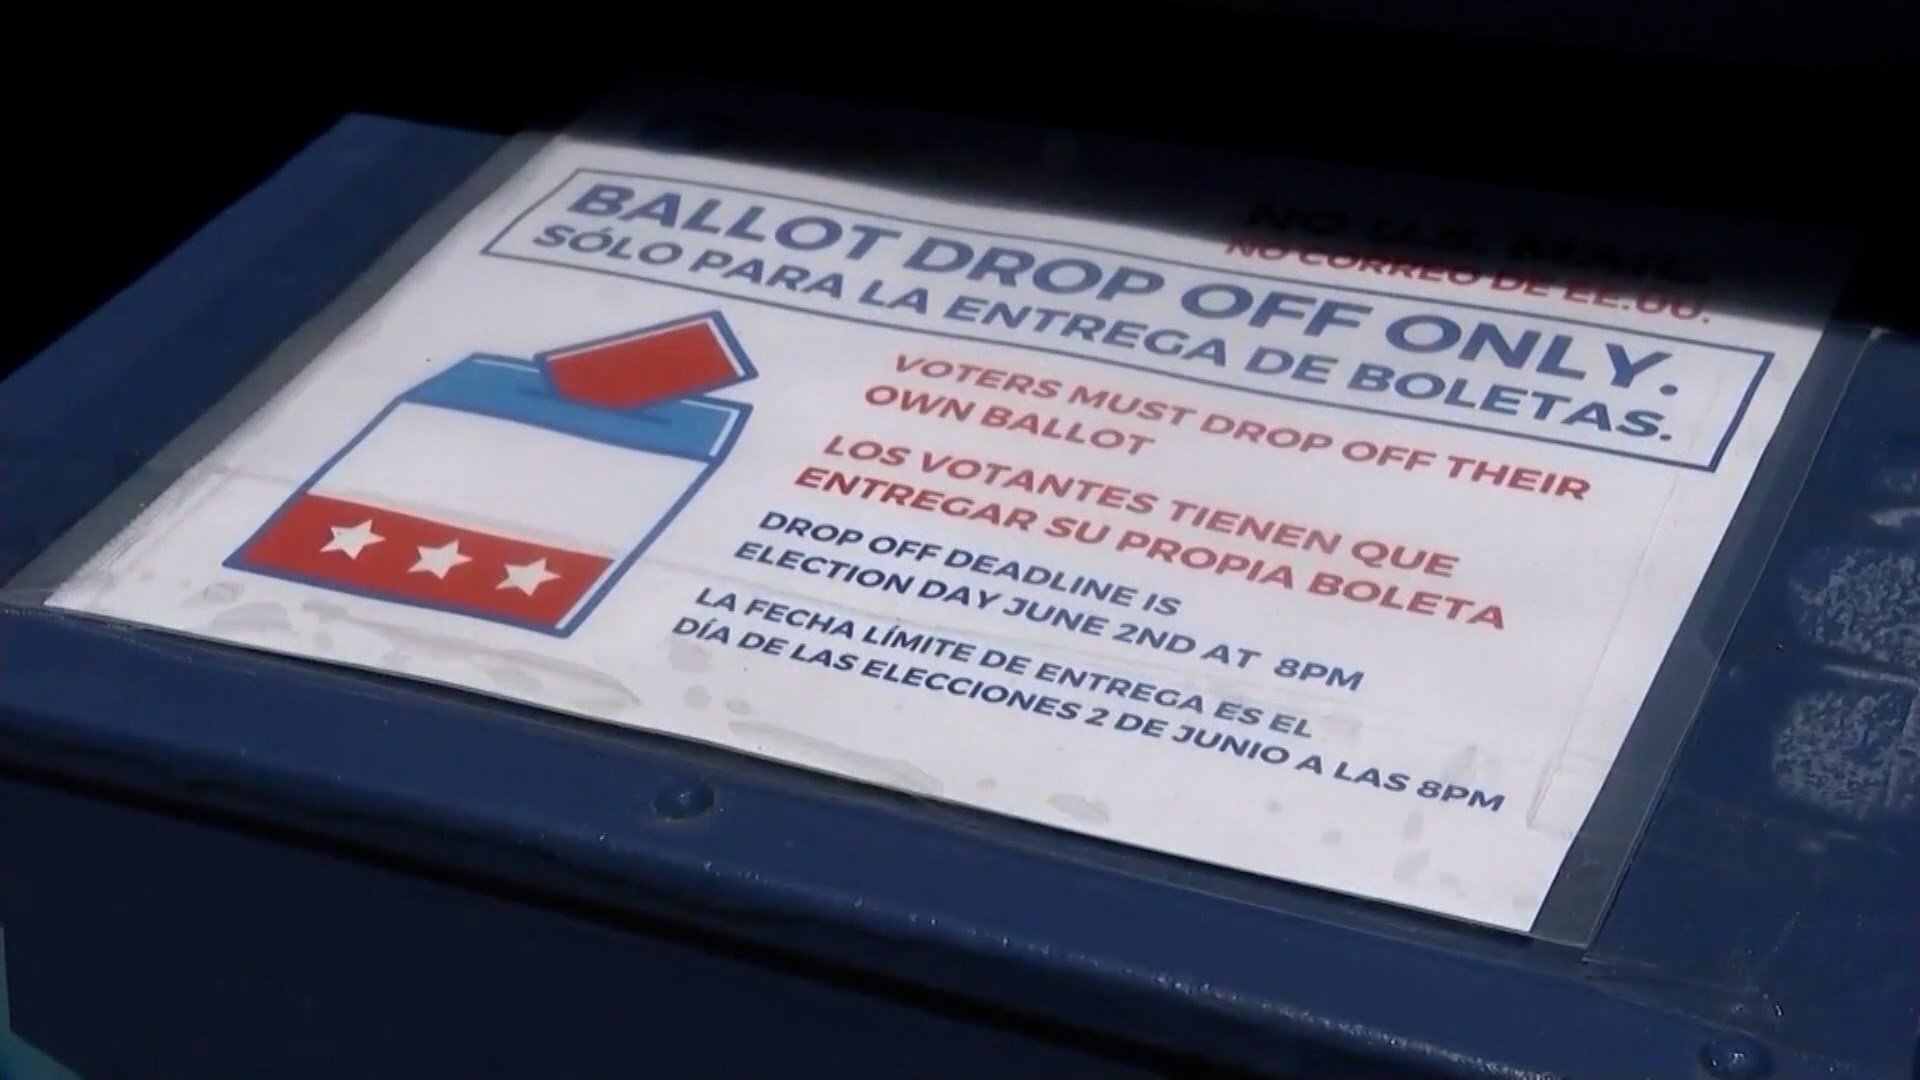 State could see more drop off locations for absentee ballots